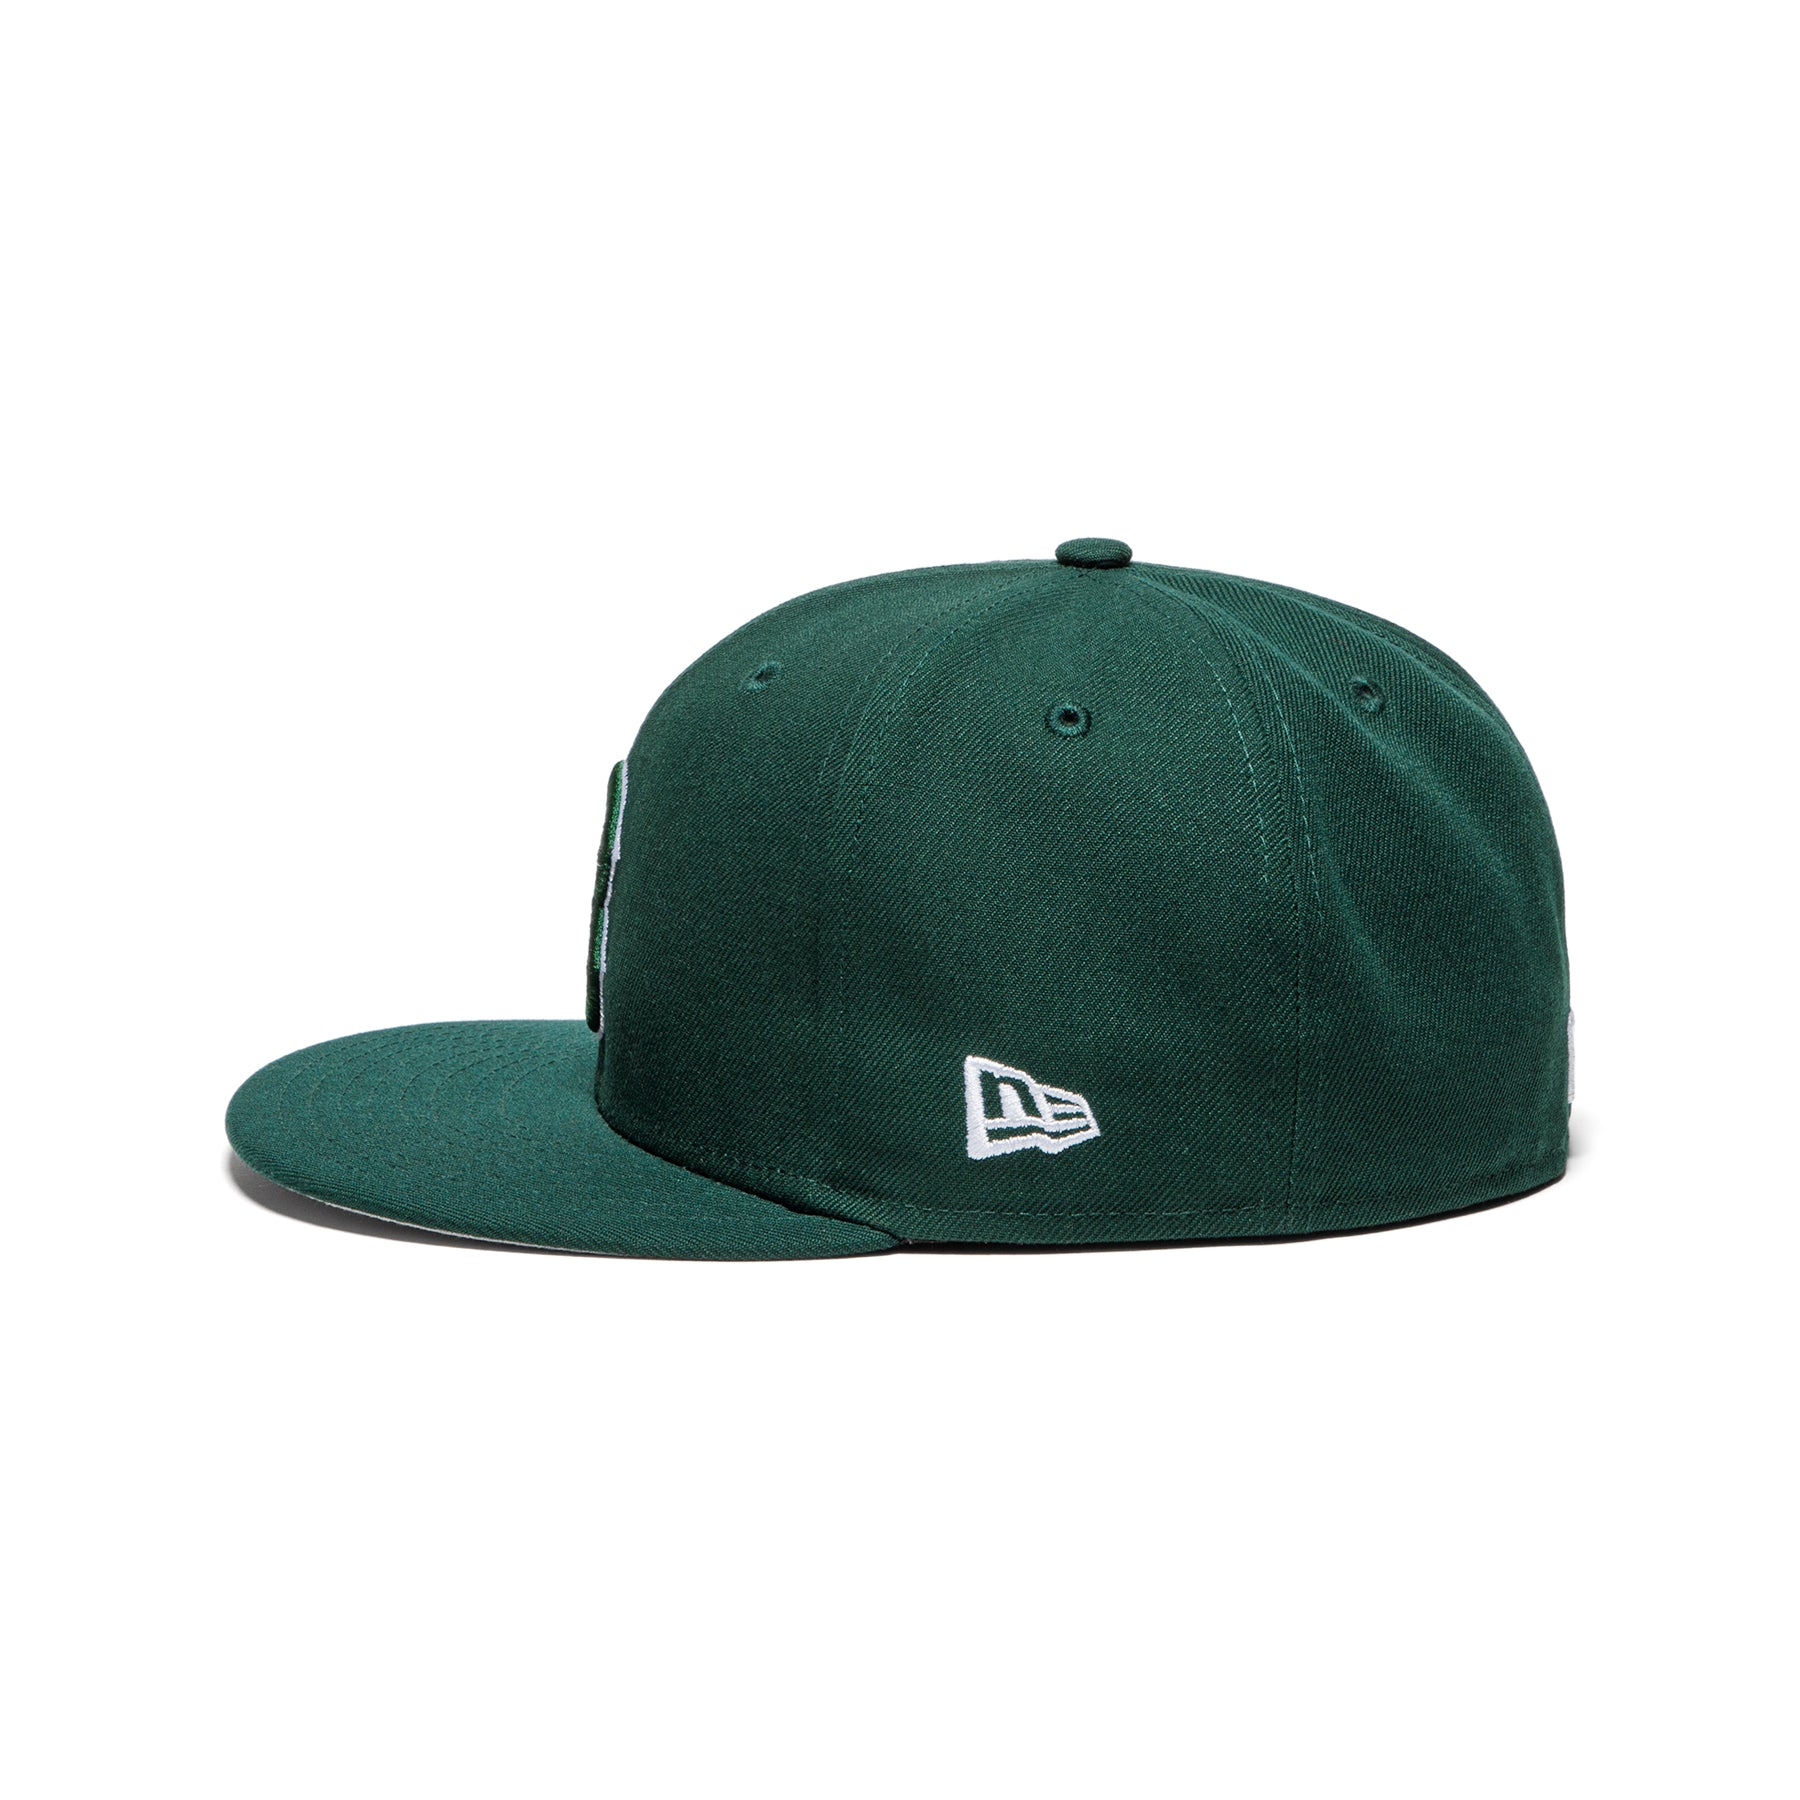 Boston Red Sox 9FORTY New Era Cap dark green – JustFitteds